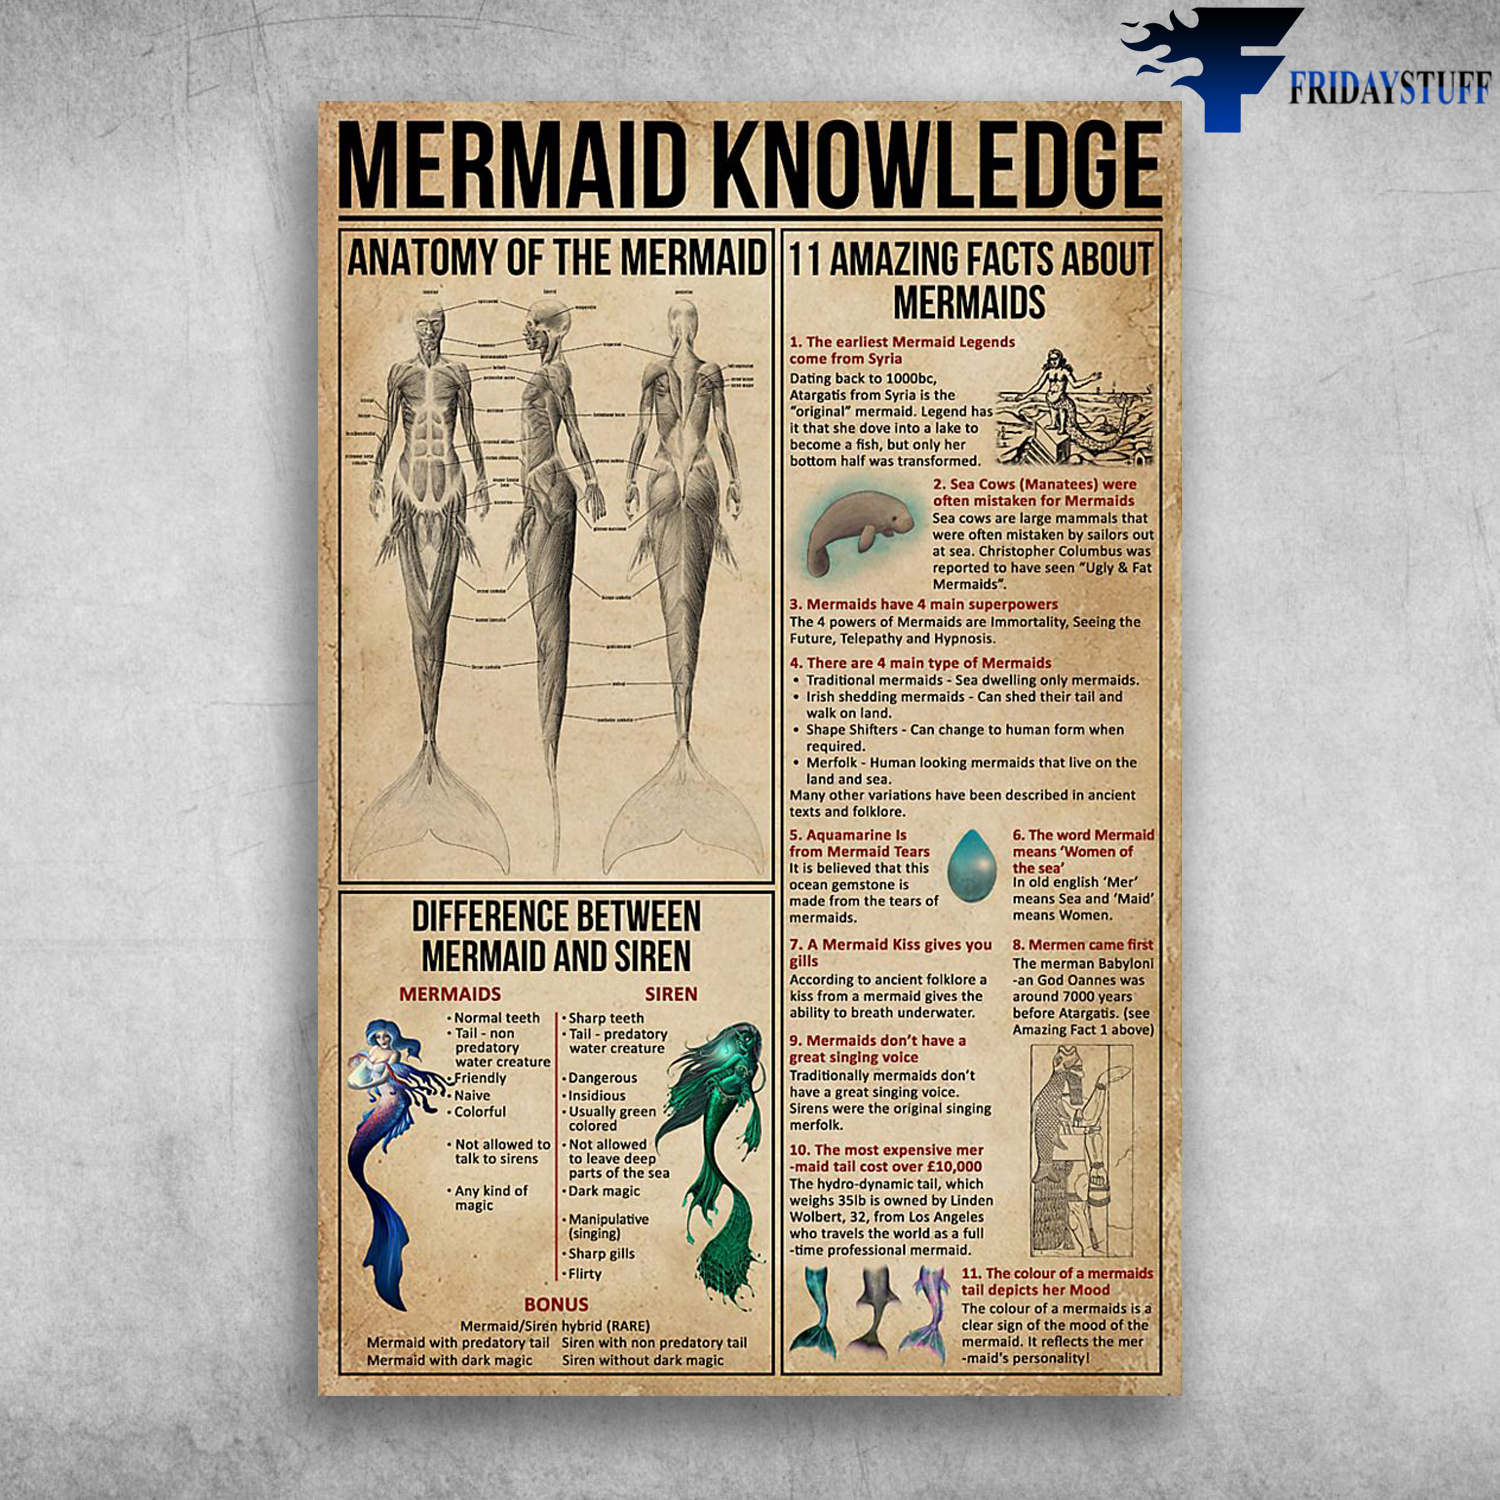 Mermaid Knowledge Amazing Facts About Mermaids